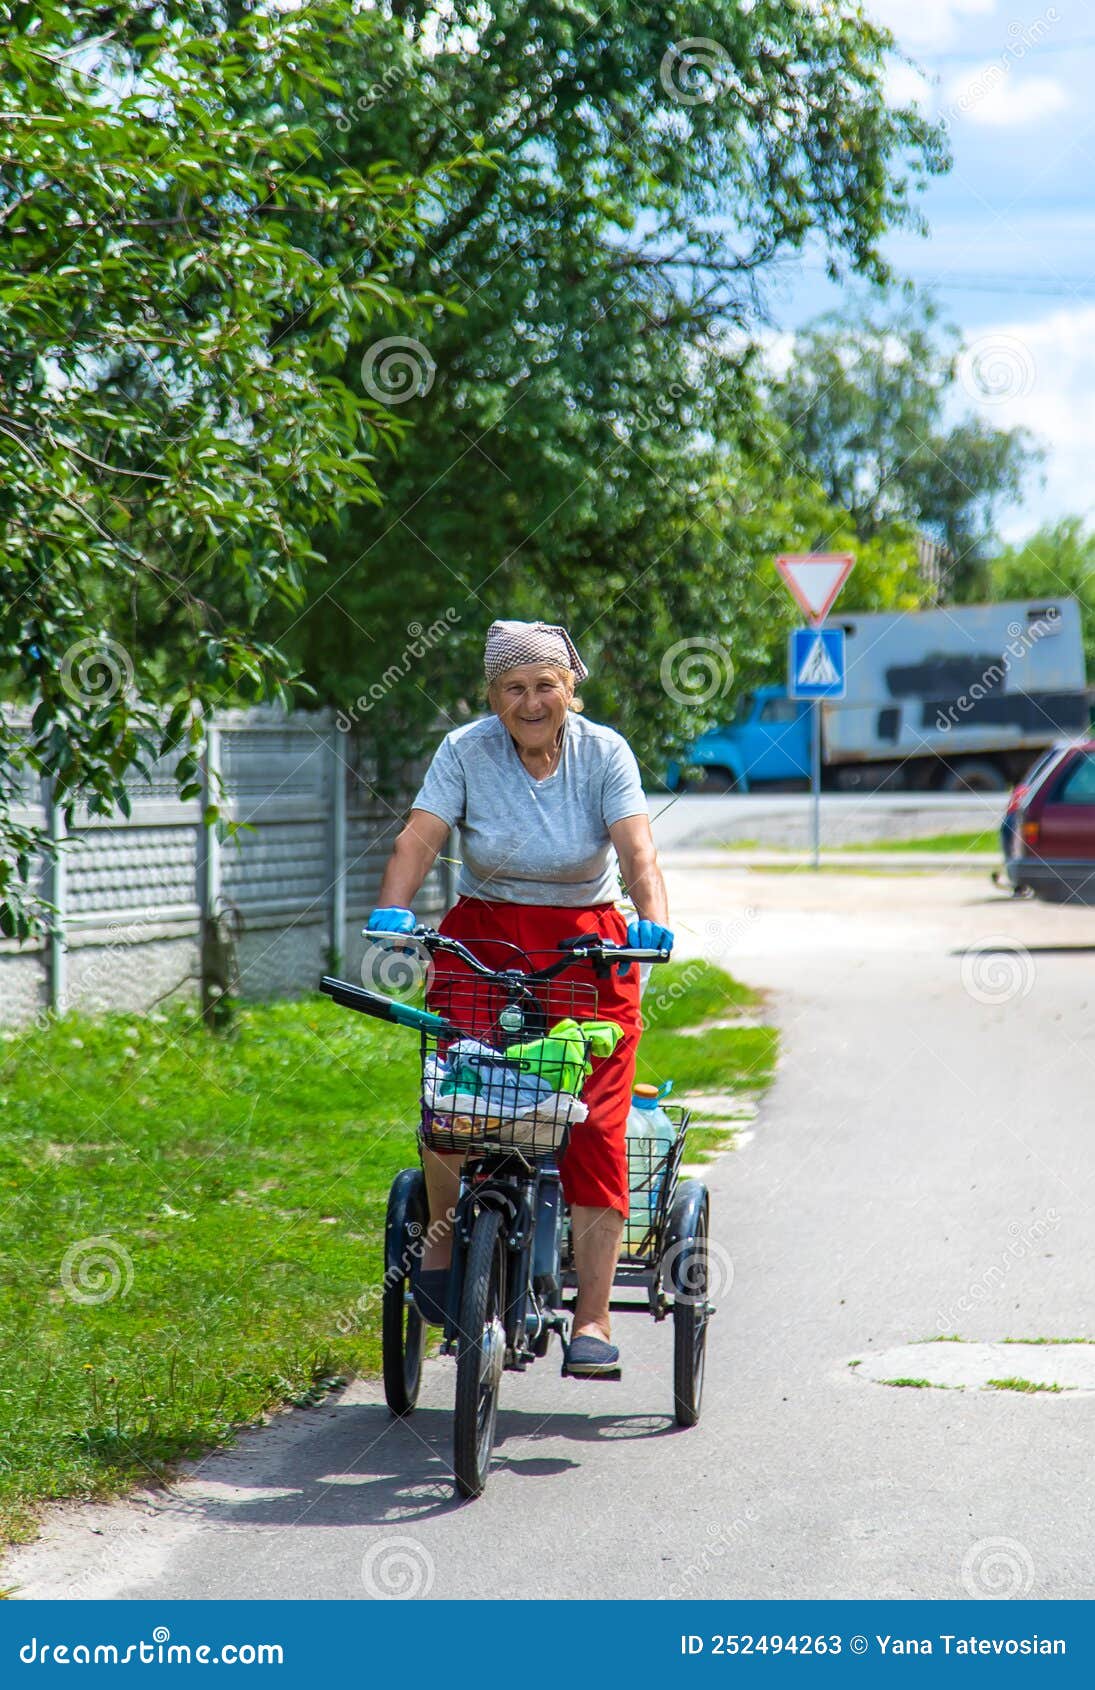 An Old Woman Rides A Bicycle Selection Focus Stock Image Image Of